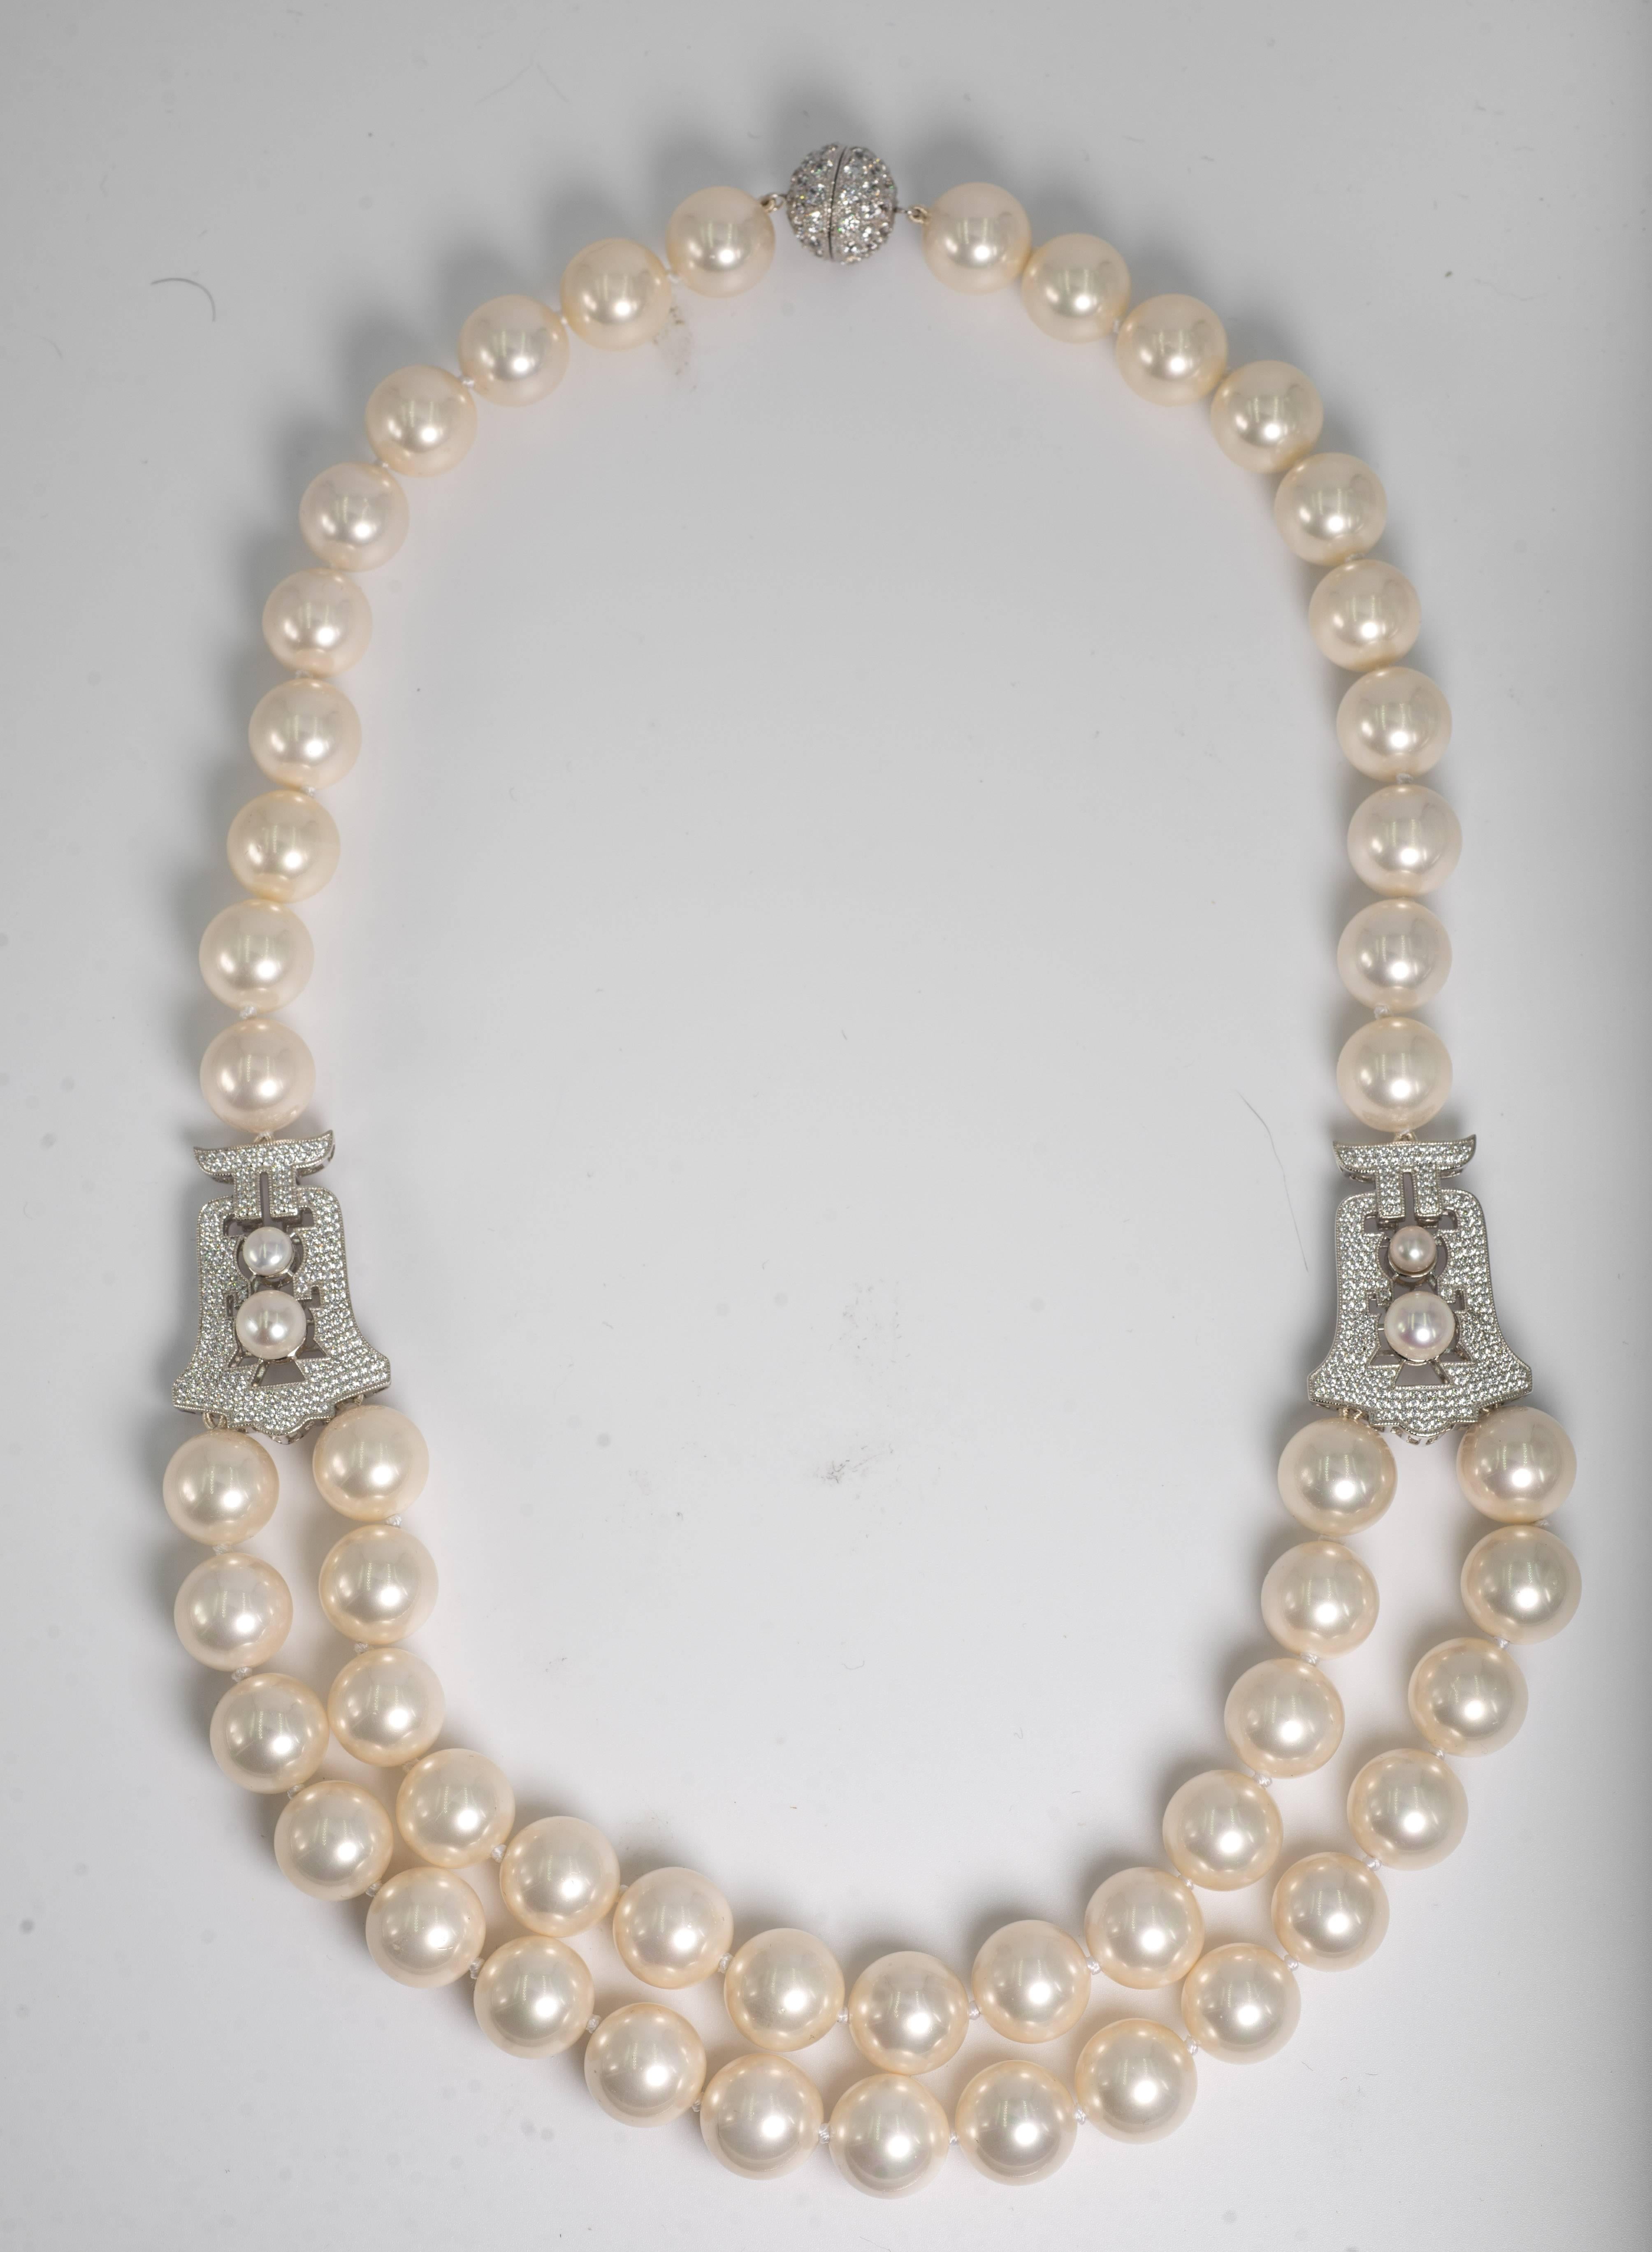 Elegant classic Audrey Hepburn Style one row 14 mm pearls  at the back, side pave cubic zirconia sterling motifs suspending two rows of 14mm pearls for the front. The Art Deco style pave motifs  are 1 1/4 inches. Total length 24 inches with a pave